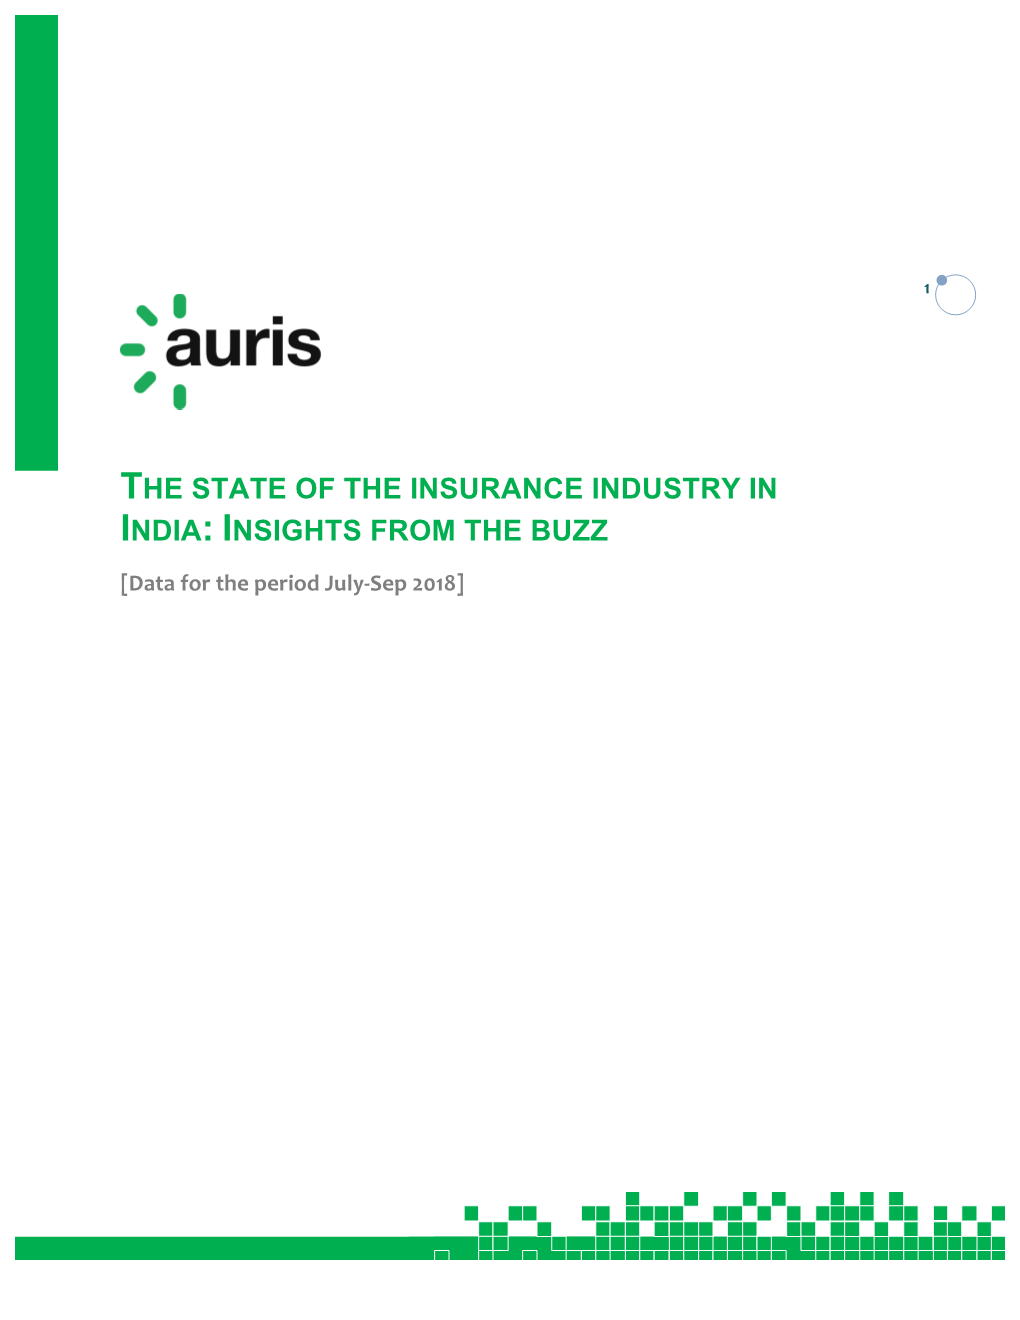 The State of the Insurance Industry in India: Insights from the Buzz